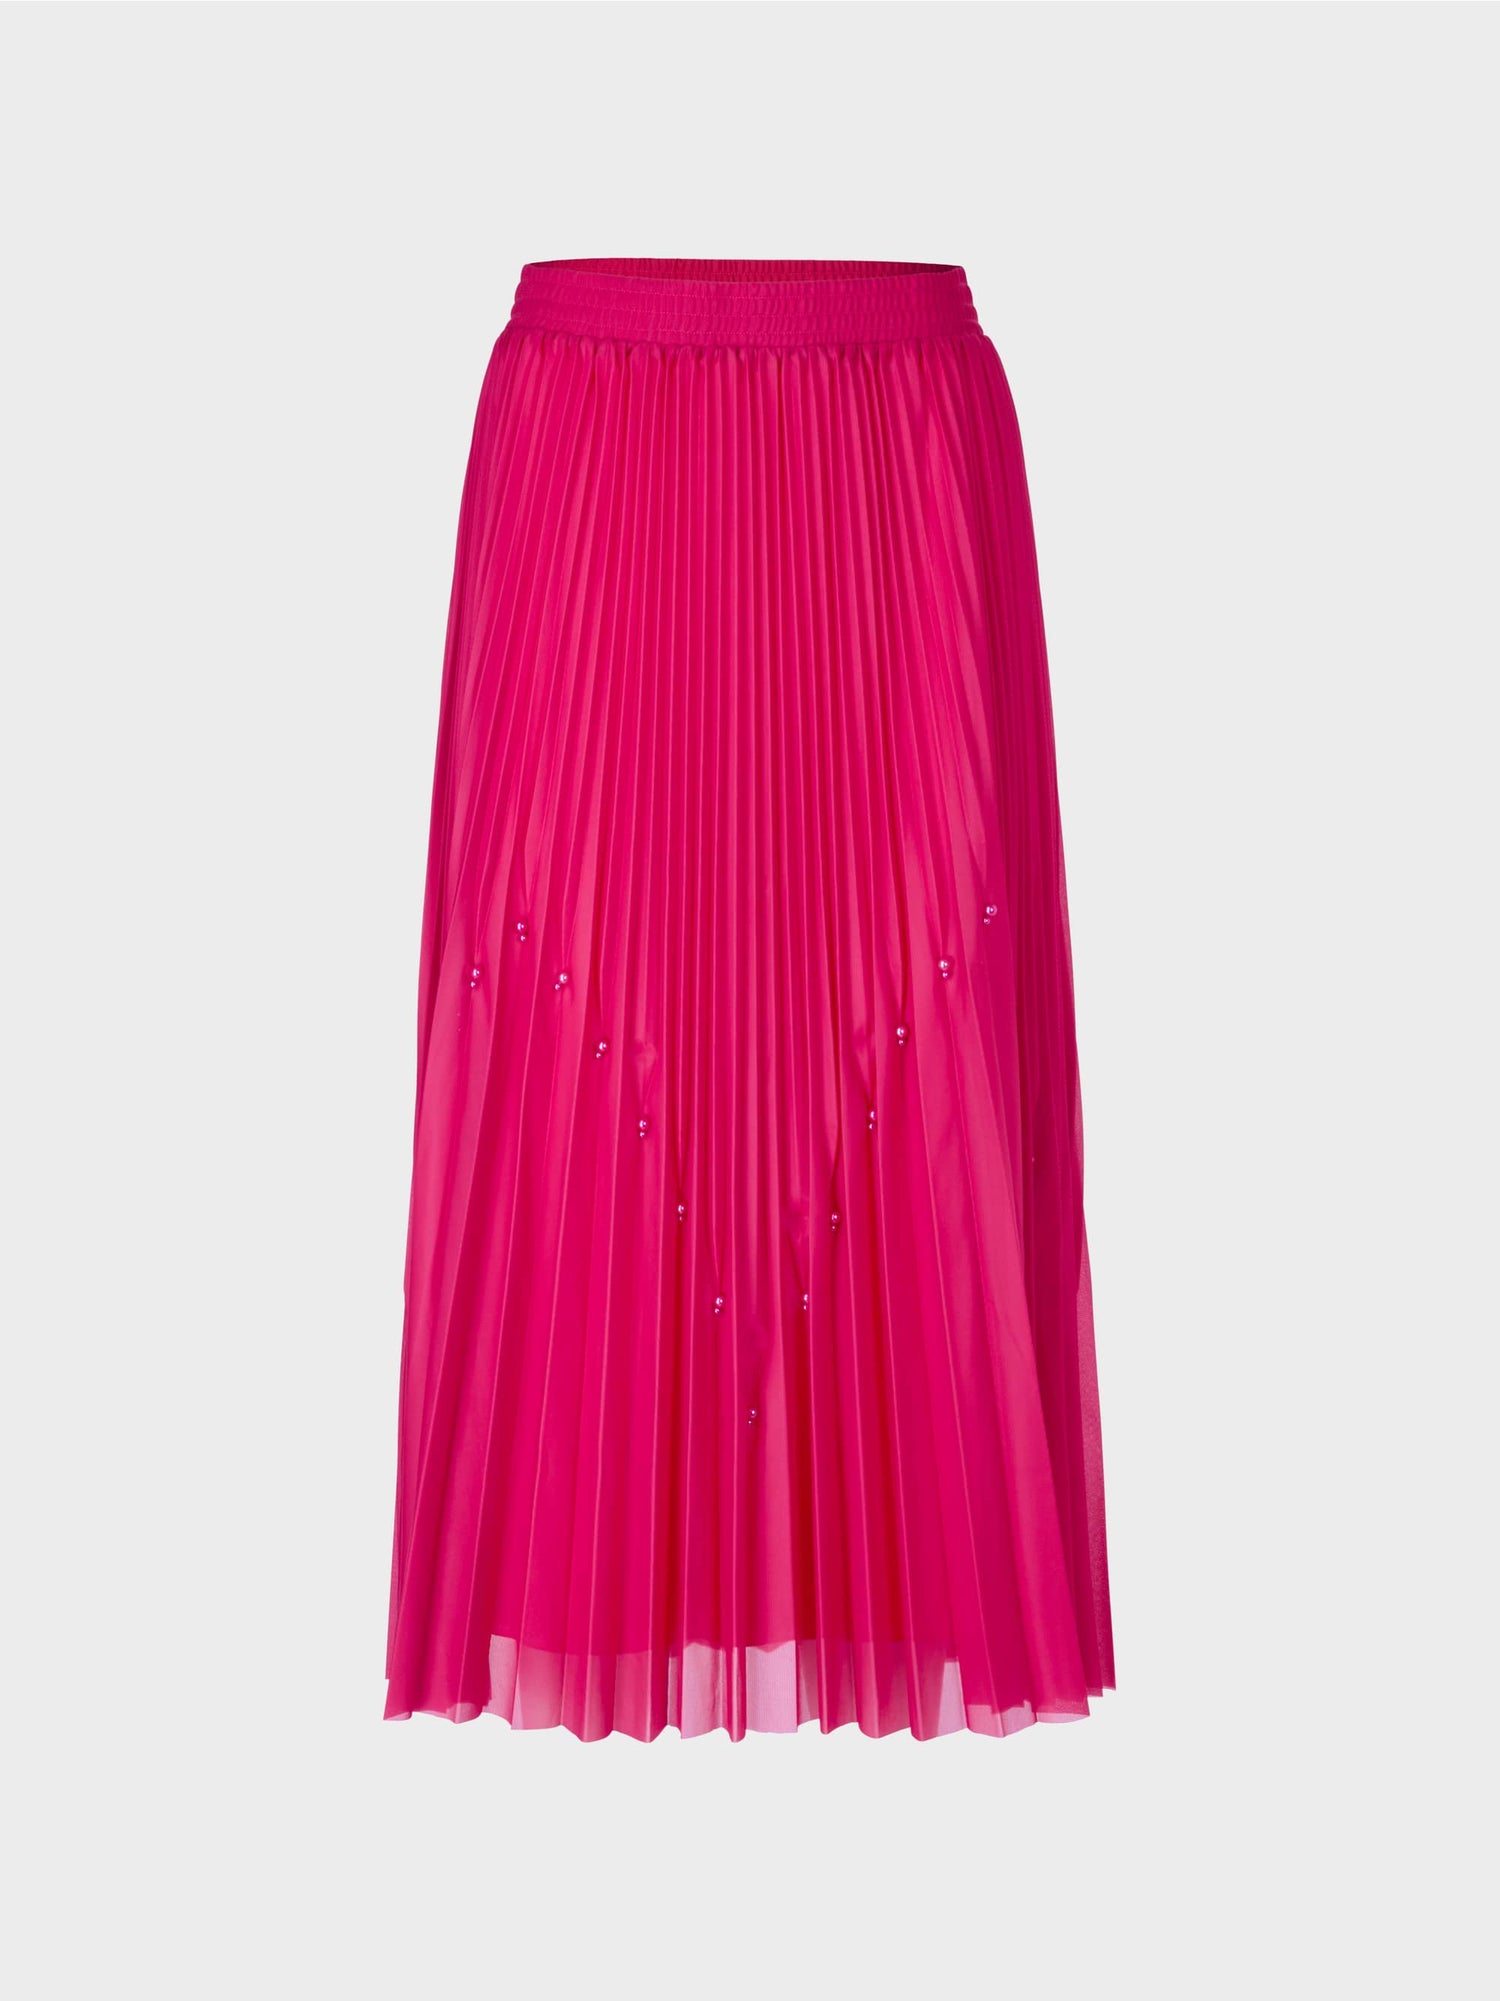 Pleated Skirt With Beads_Wc 71.29 W95_267_06